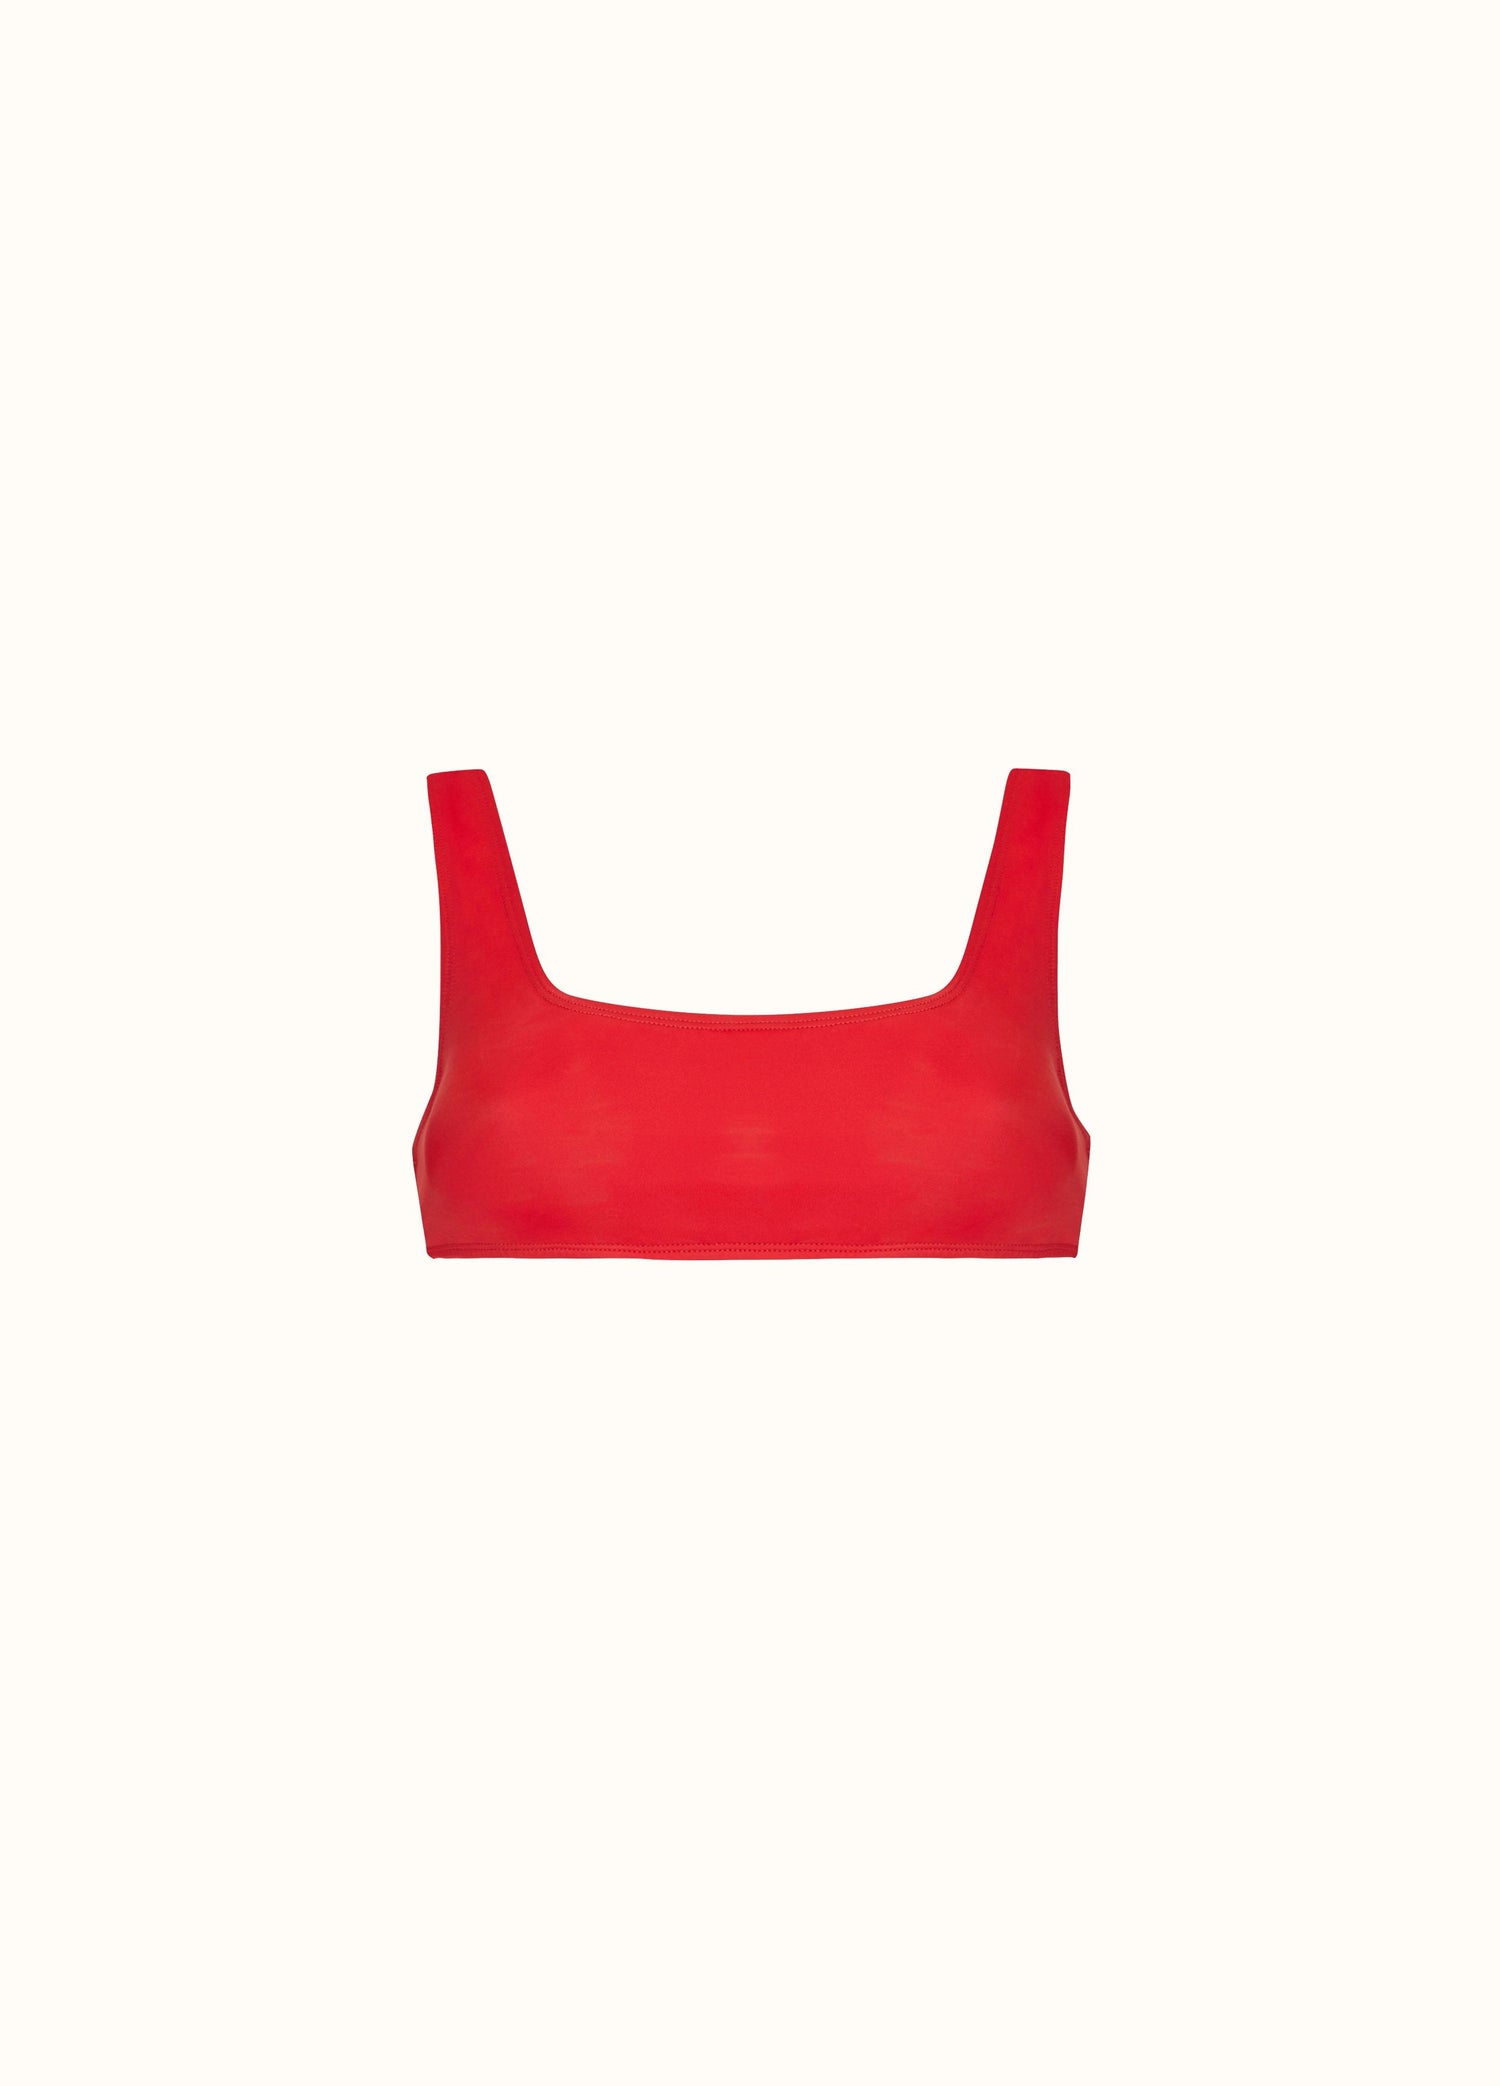 The Athletic Top - Matte Fabric Talia Collins